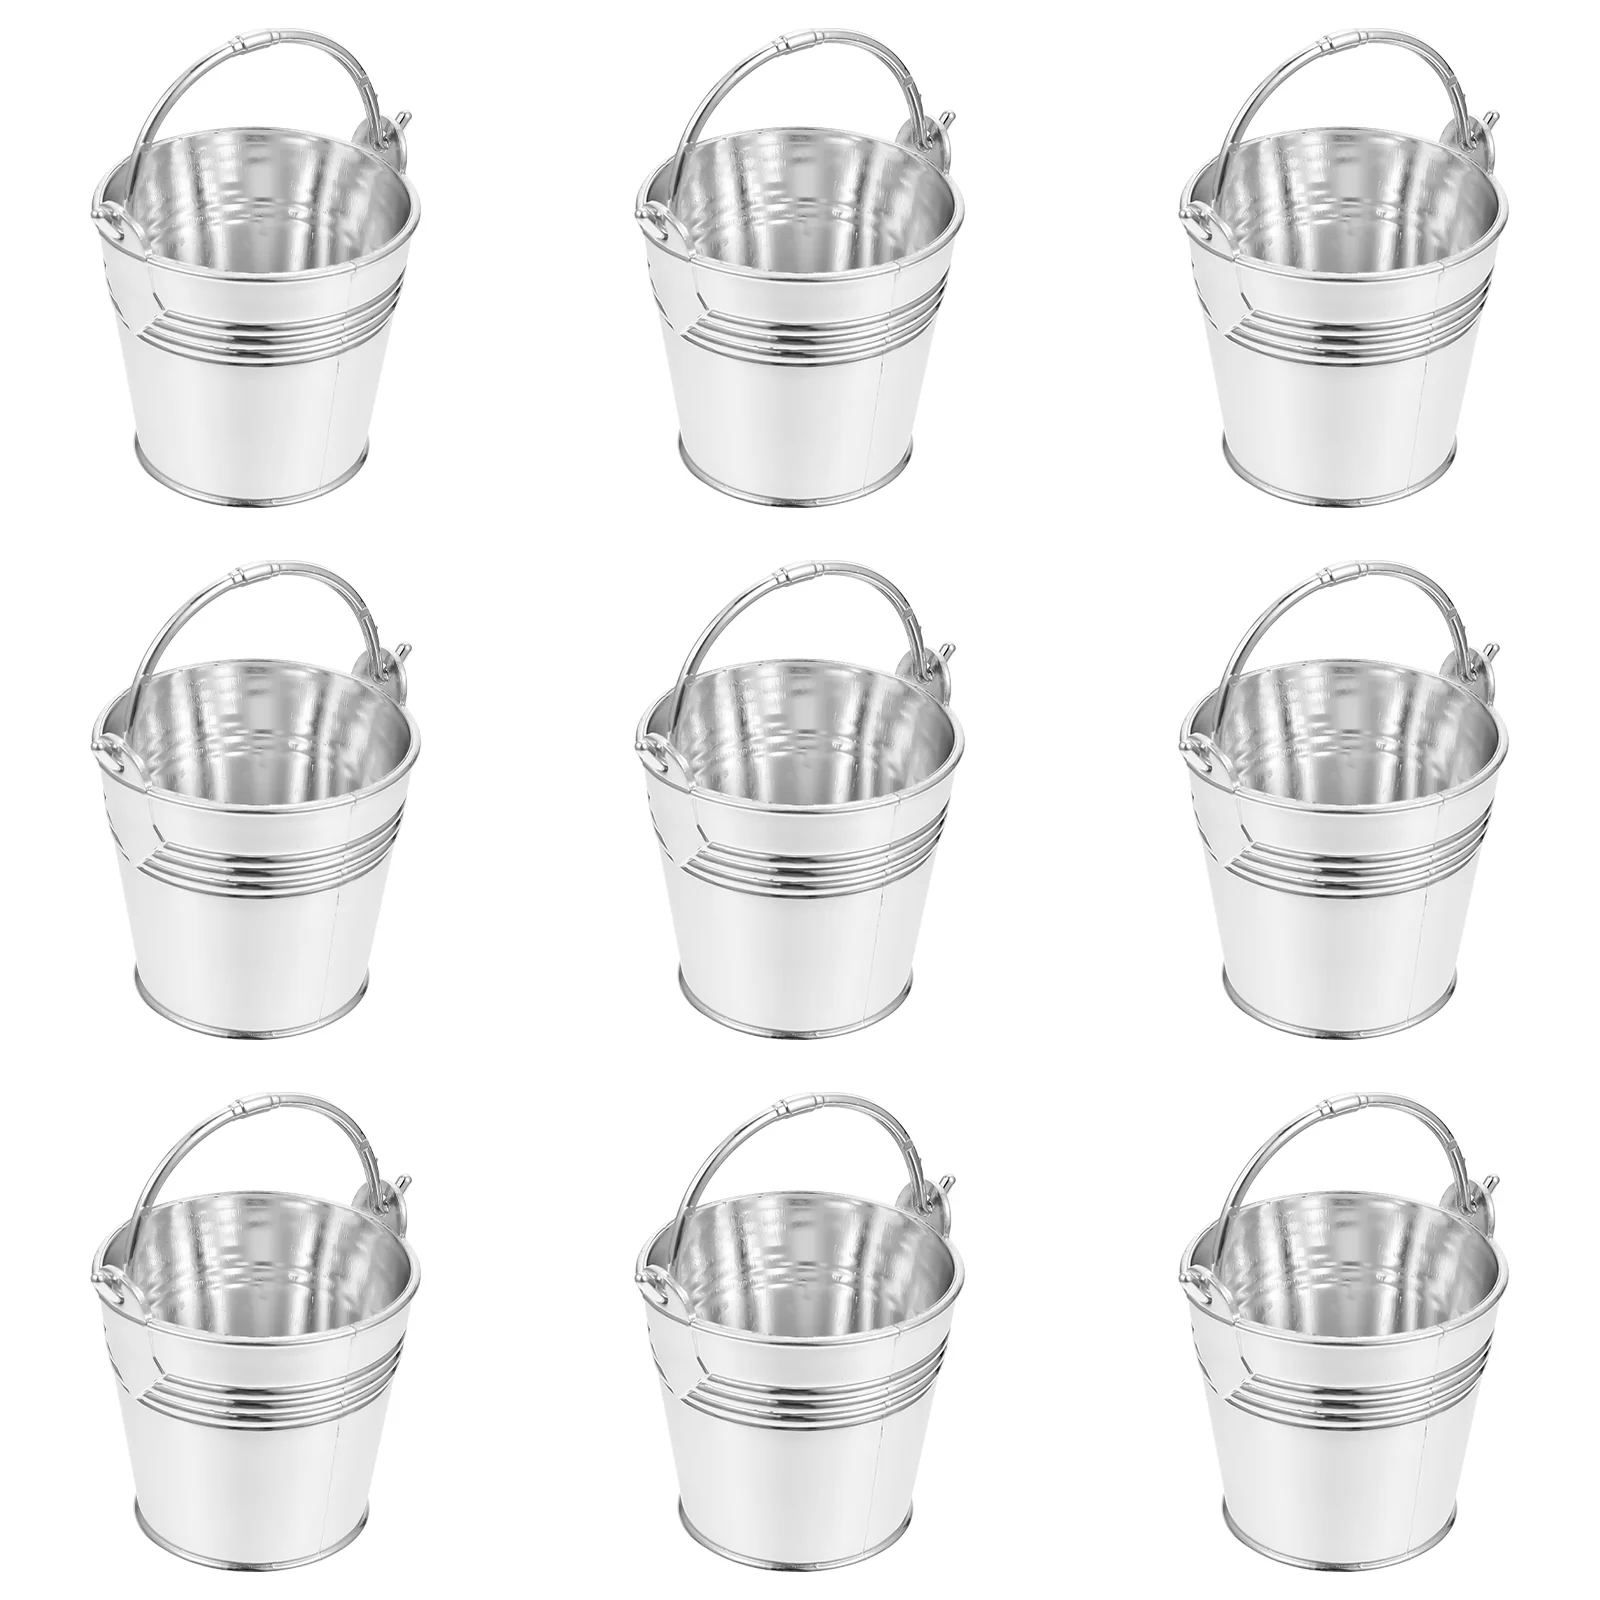 Buckets Bucket Mini Plastic Party Galvanized Pails Candy Snack Handles Holder Favors Snacks Flower Ice Favor Tinplate